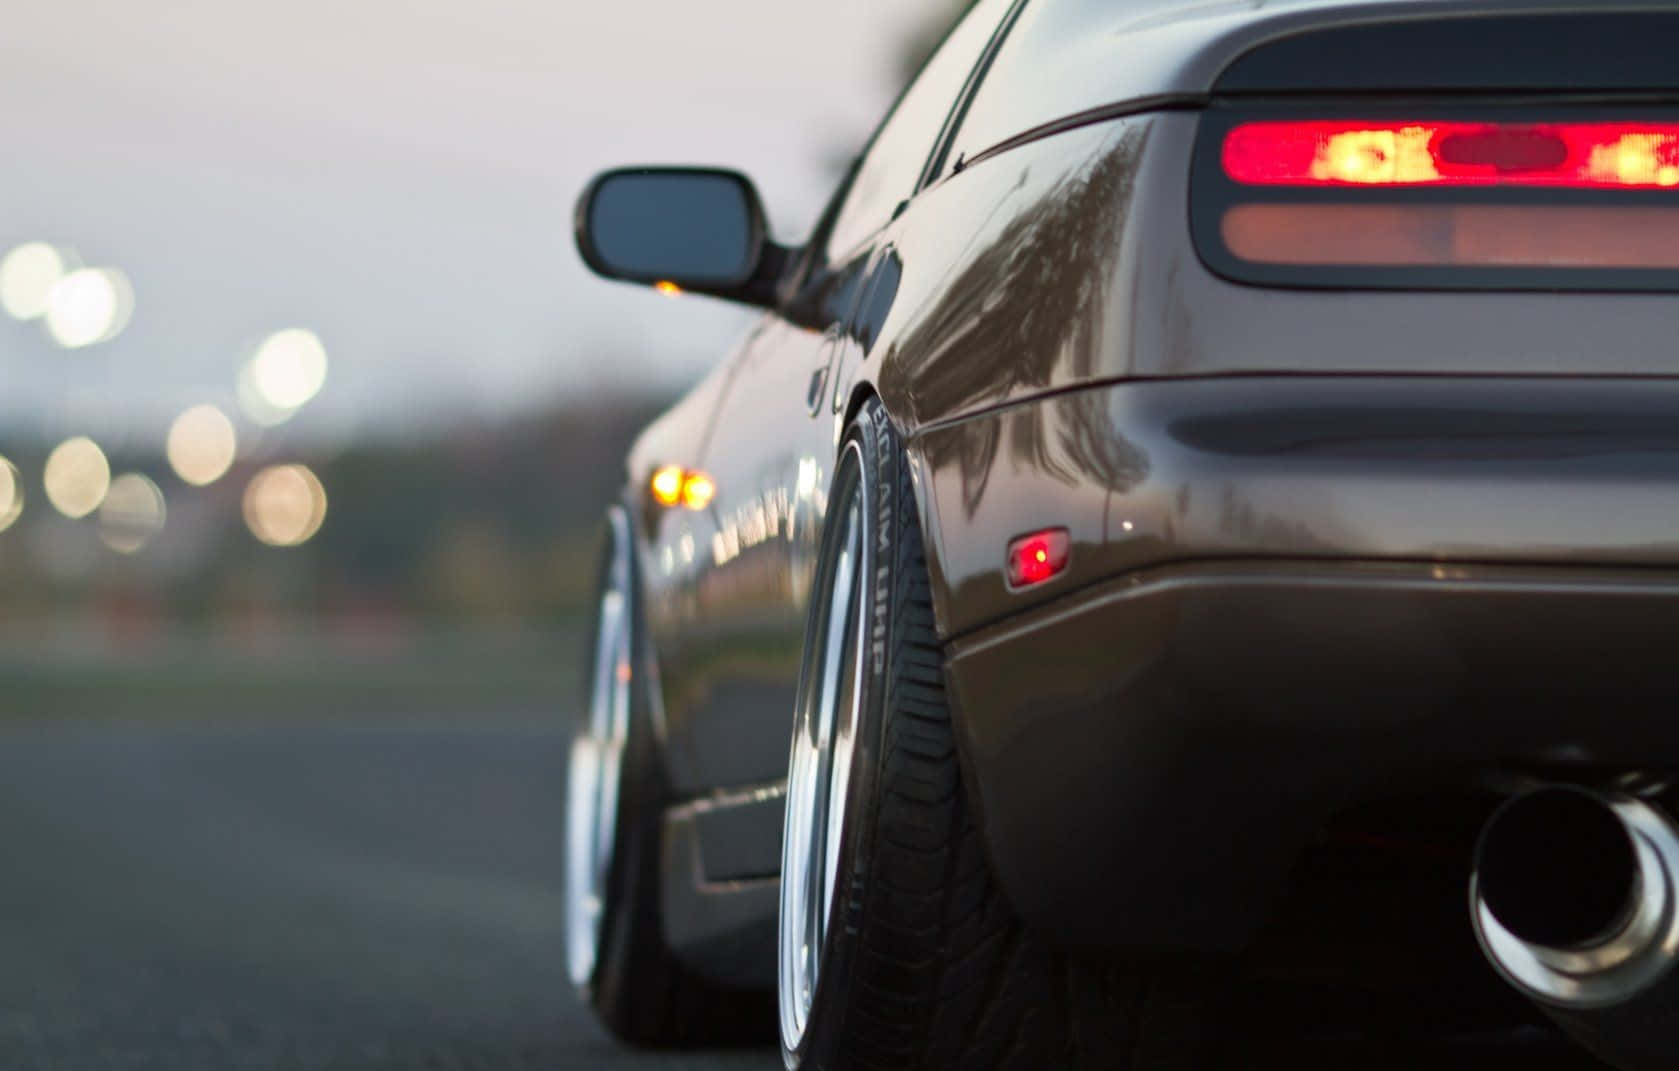 Majestic Vintage Nissan 300zx Dominating The Road Wallpaper